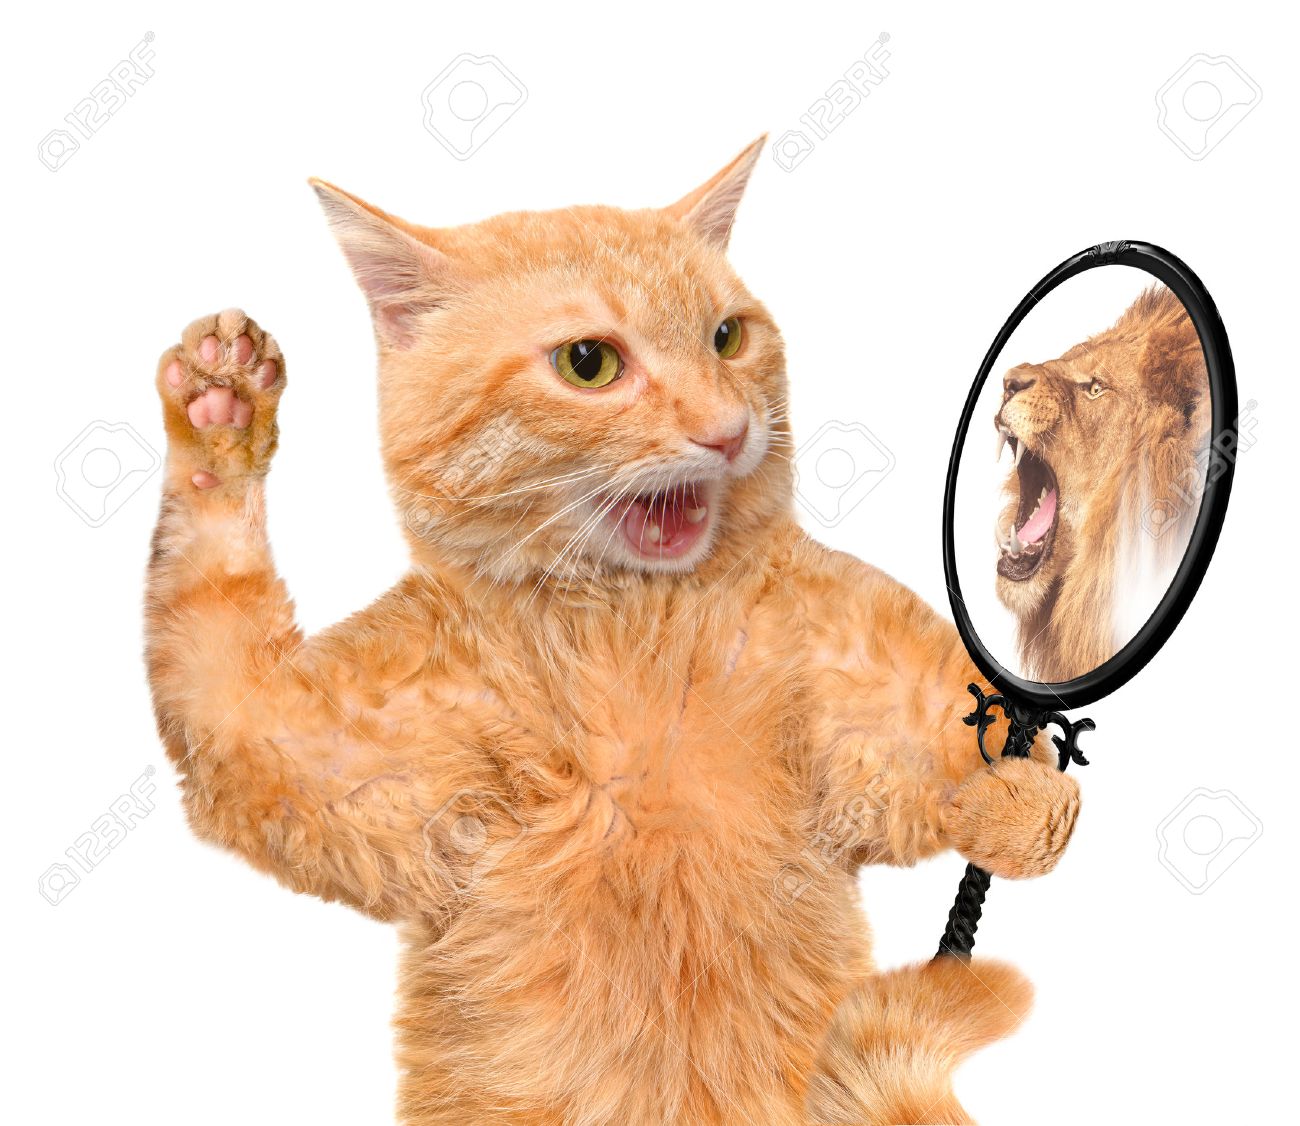 46006438-cat-looking-into-the-mirror-and-seeing-a-reflection-of-a-lion-.jpg